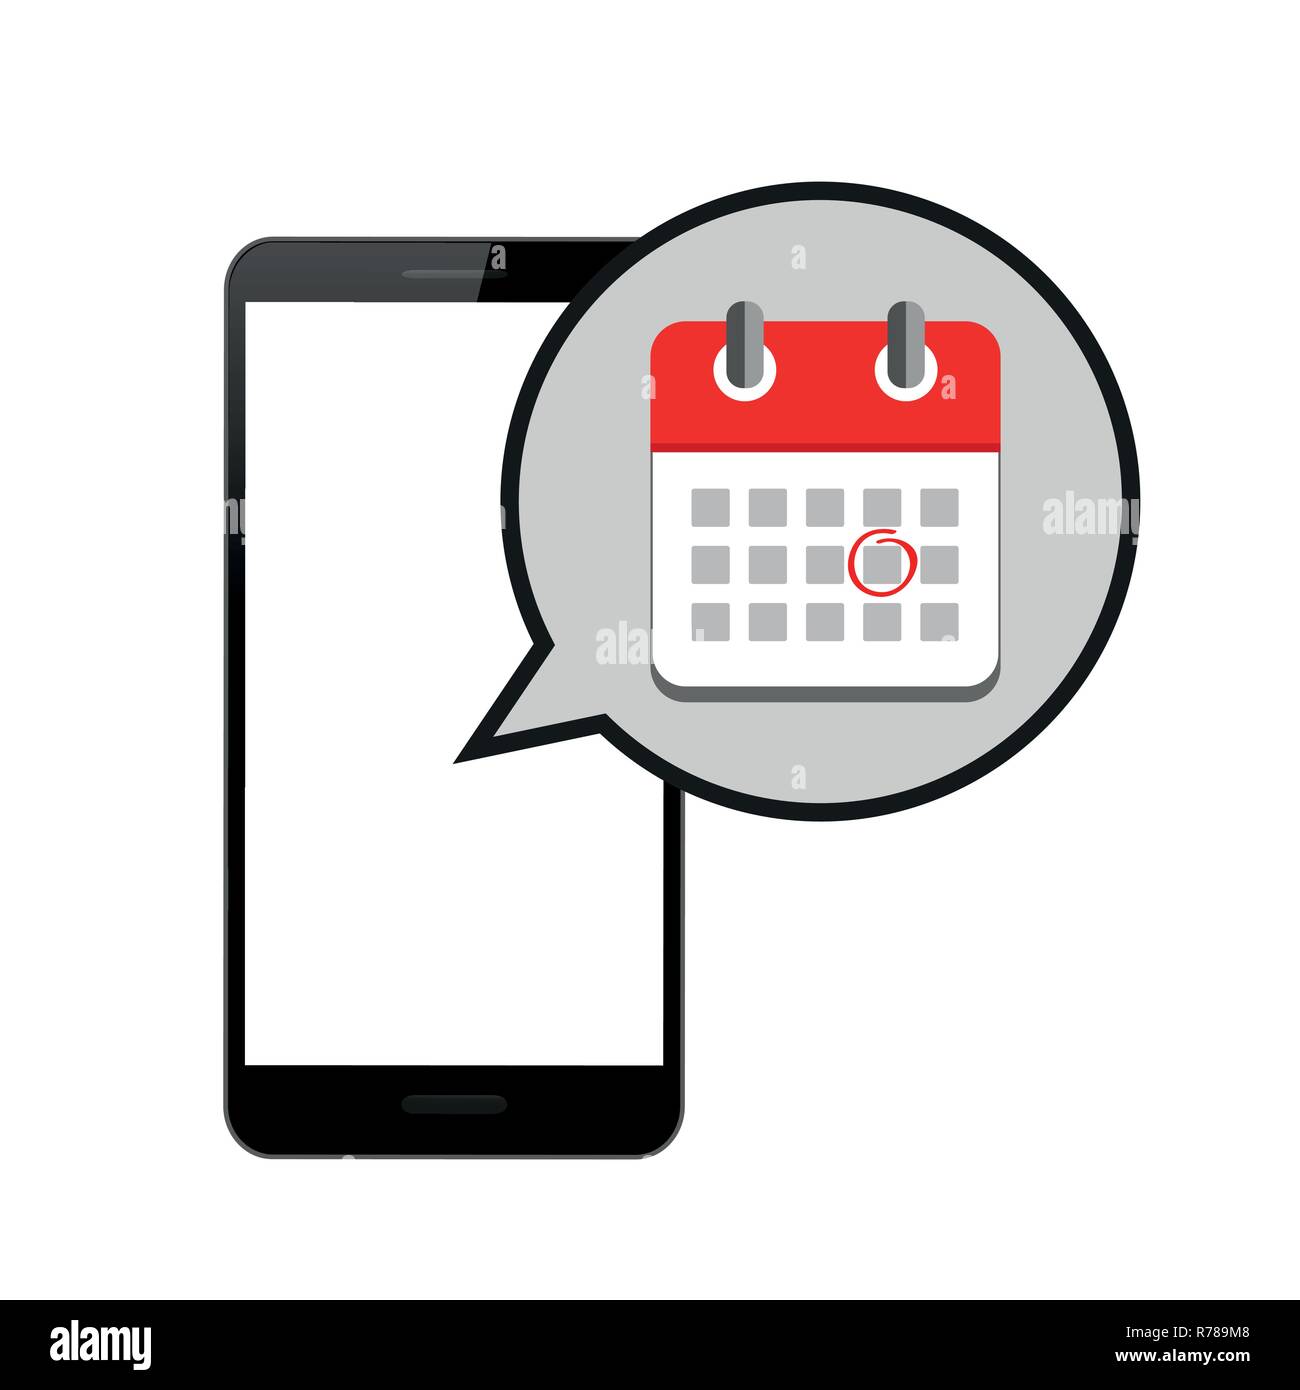 appointment in red online calendar in a smartphone vector illustration EPS10 Stock Vector